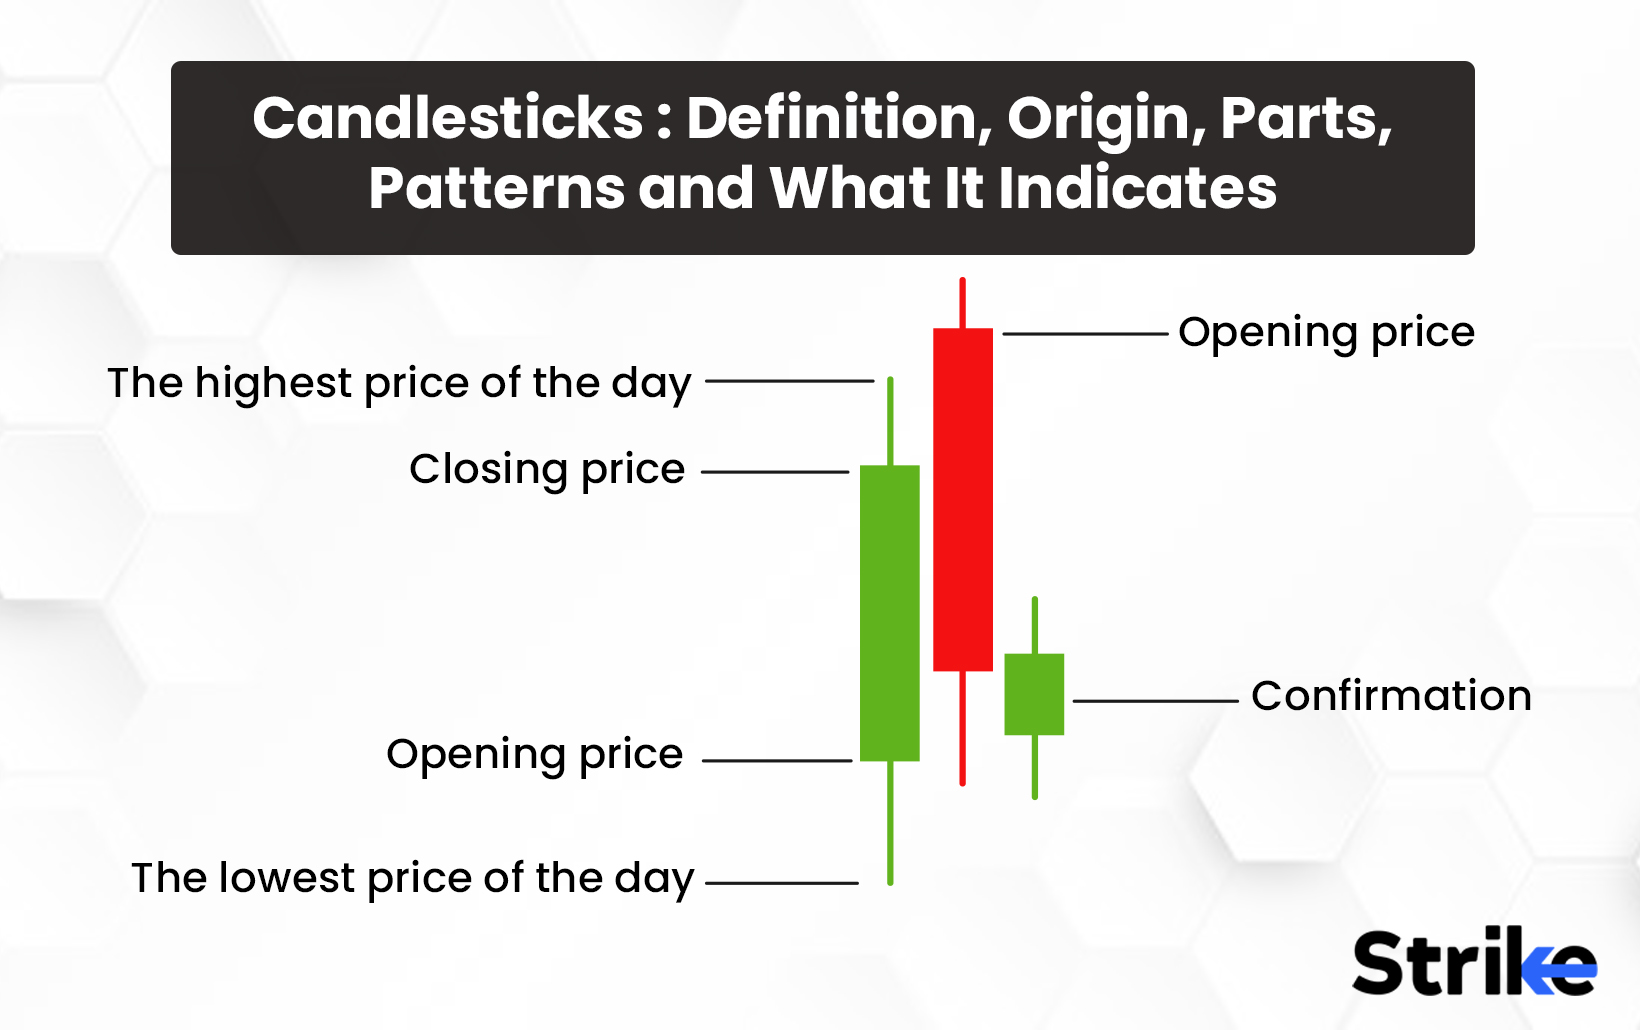 Candlesticks: Definition, Origin, Parts, Patterns and What It Indicates?